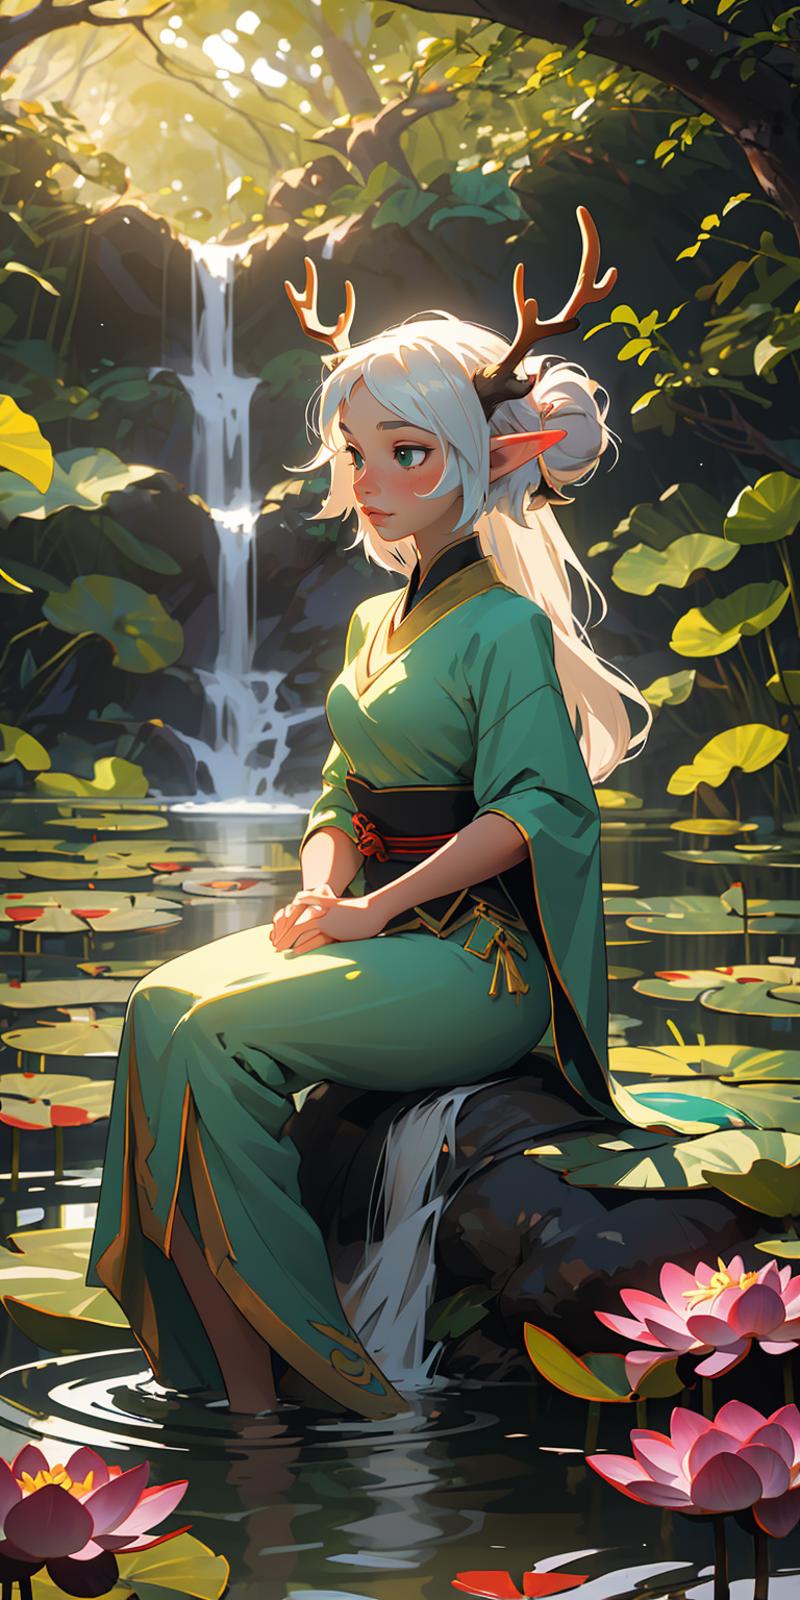 A beautiful illustration of a woman in a green dress sitting by a waterfall.